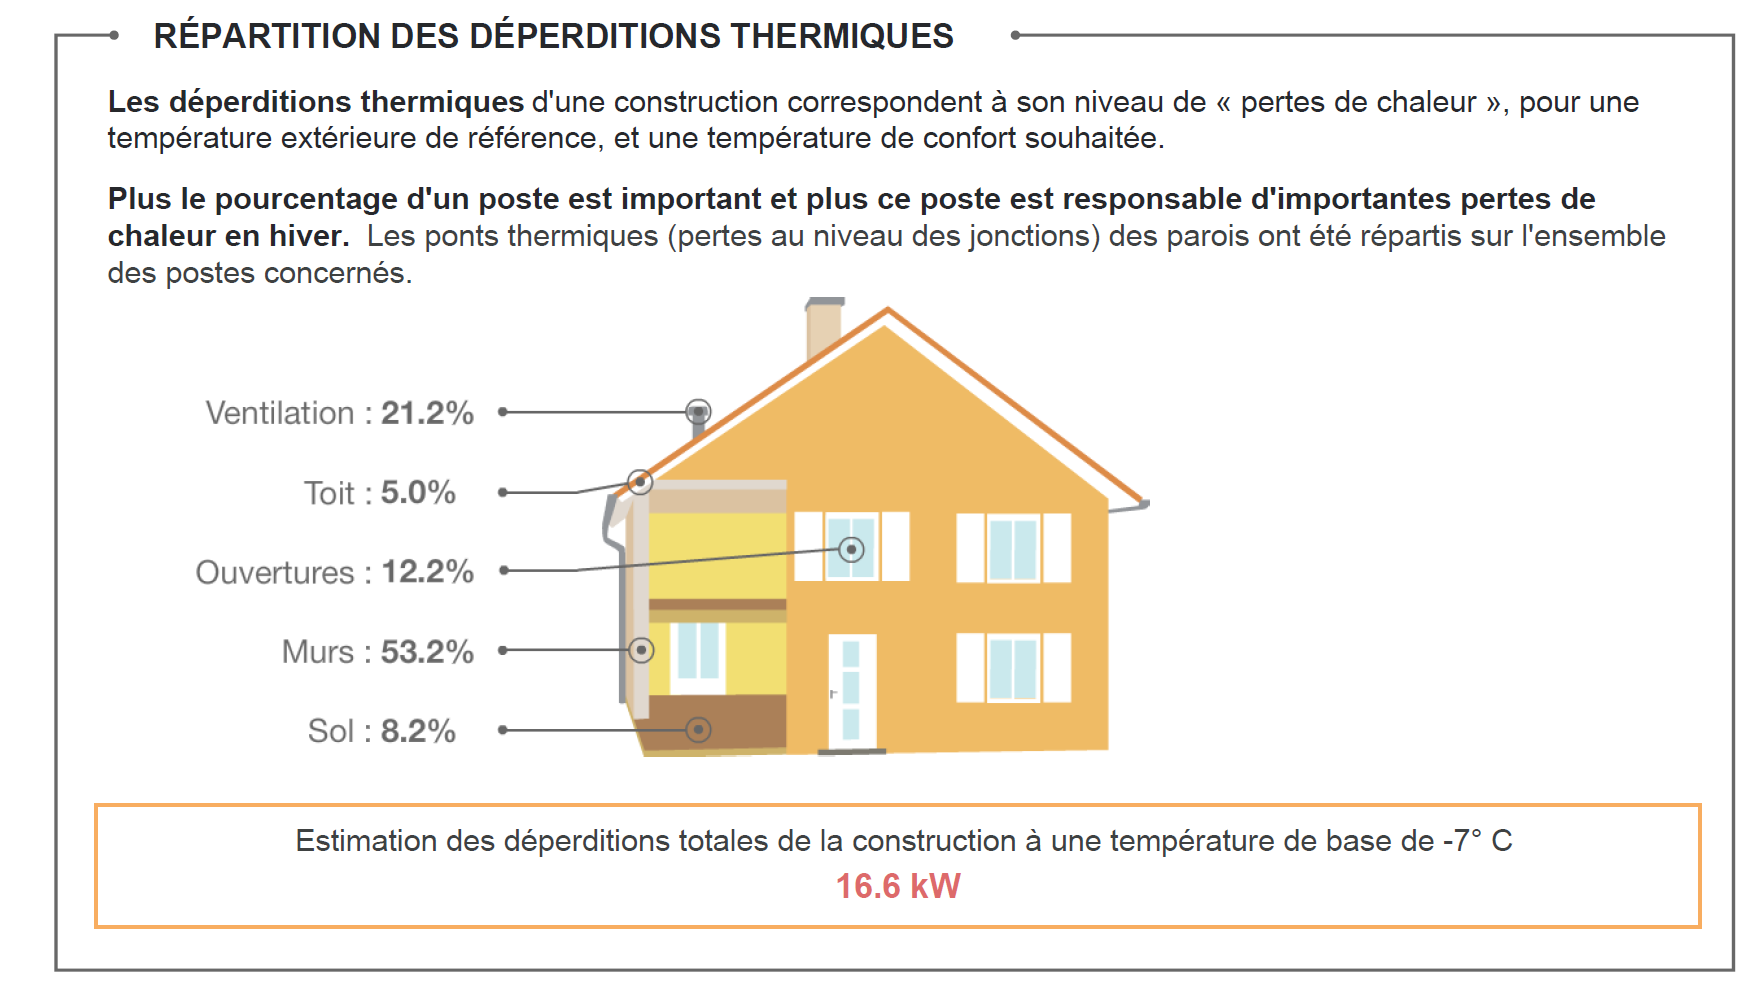 repartition-deperditions-thermiques